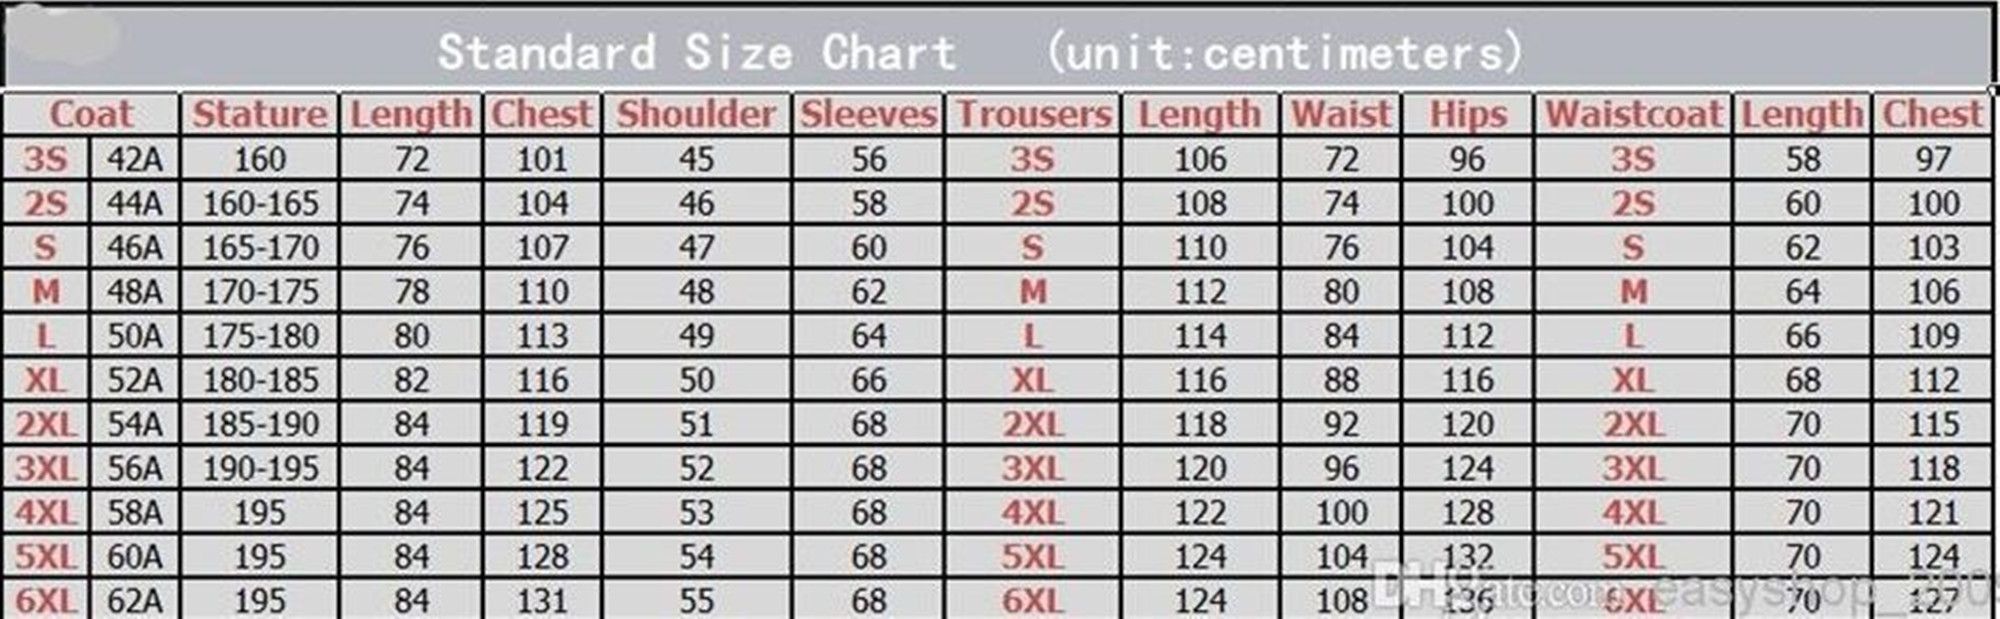 2019 The Latest Design Men'S Wedding Suits Tuxedo Black Jacket With White  Collar Custom Made Suits Men Groom Wear SuitsJacket+Pants From ...